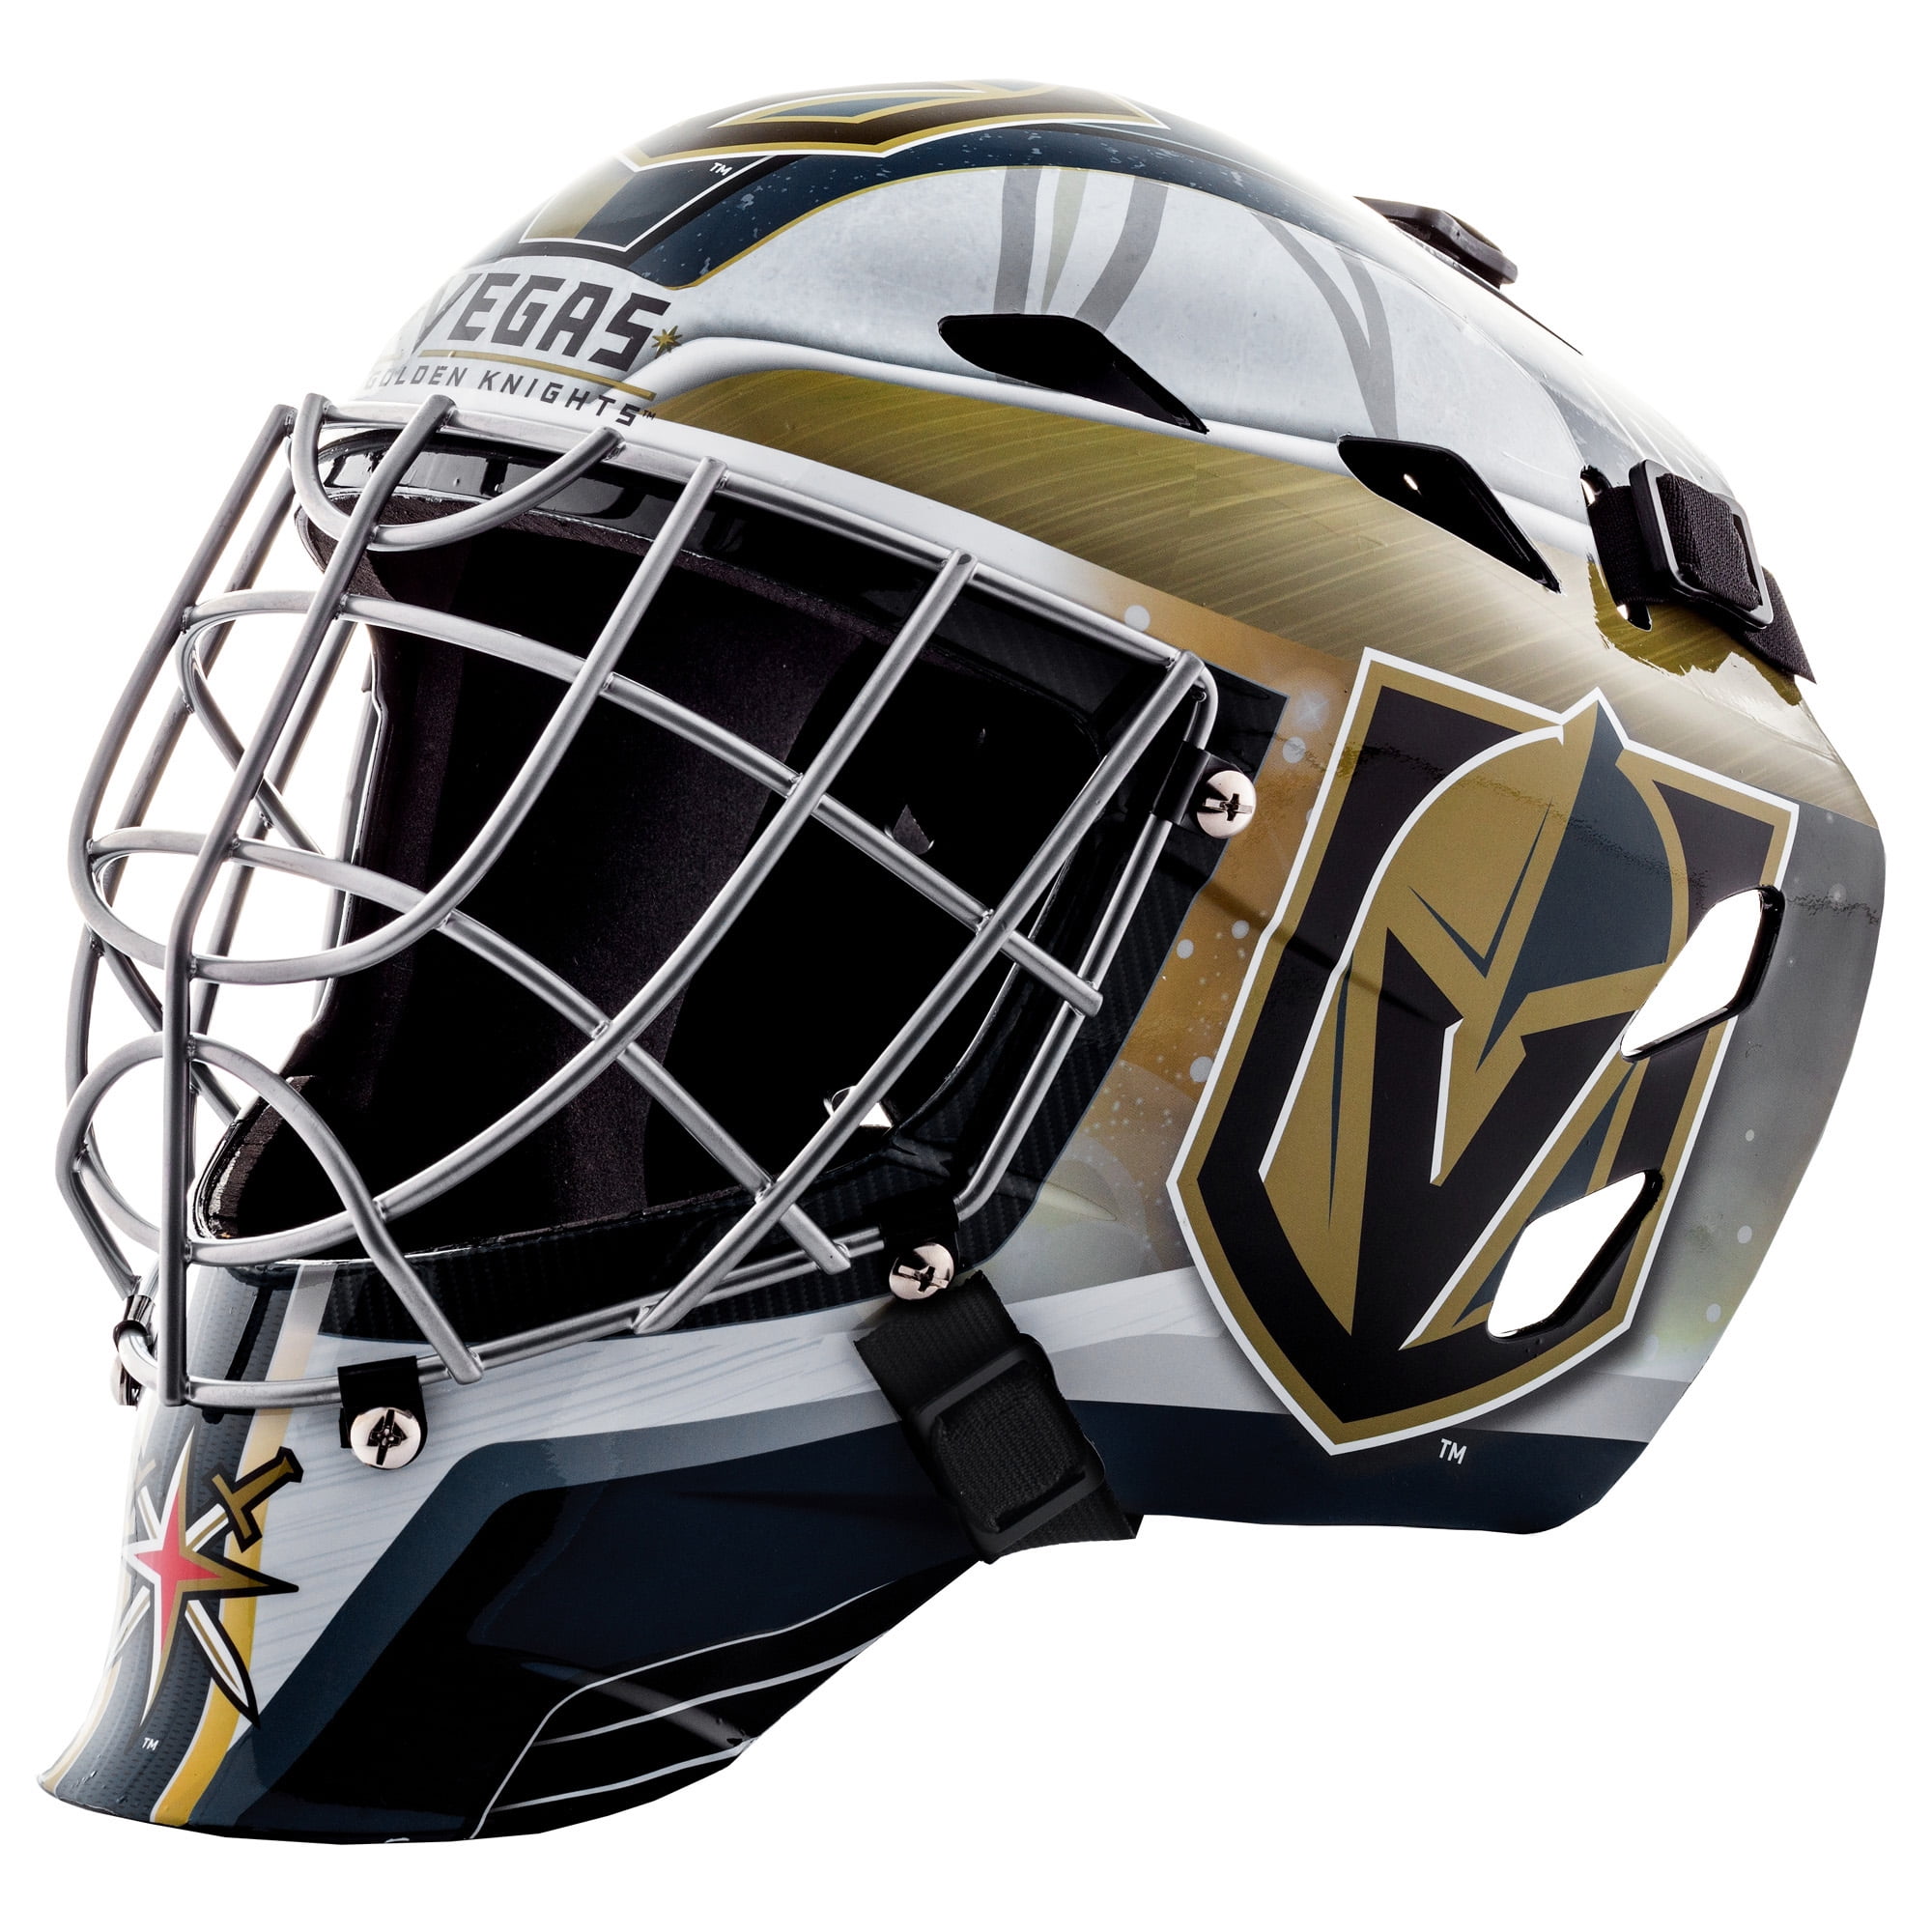 Personalized helmet designs for non-goalies? Some Bruins like the